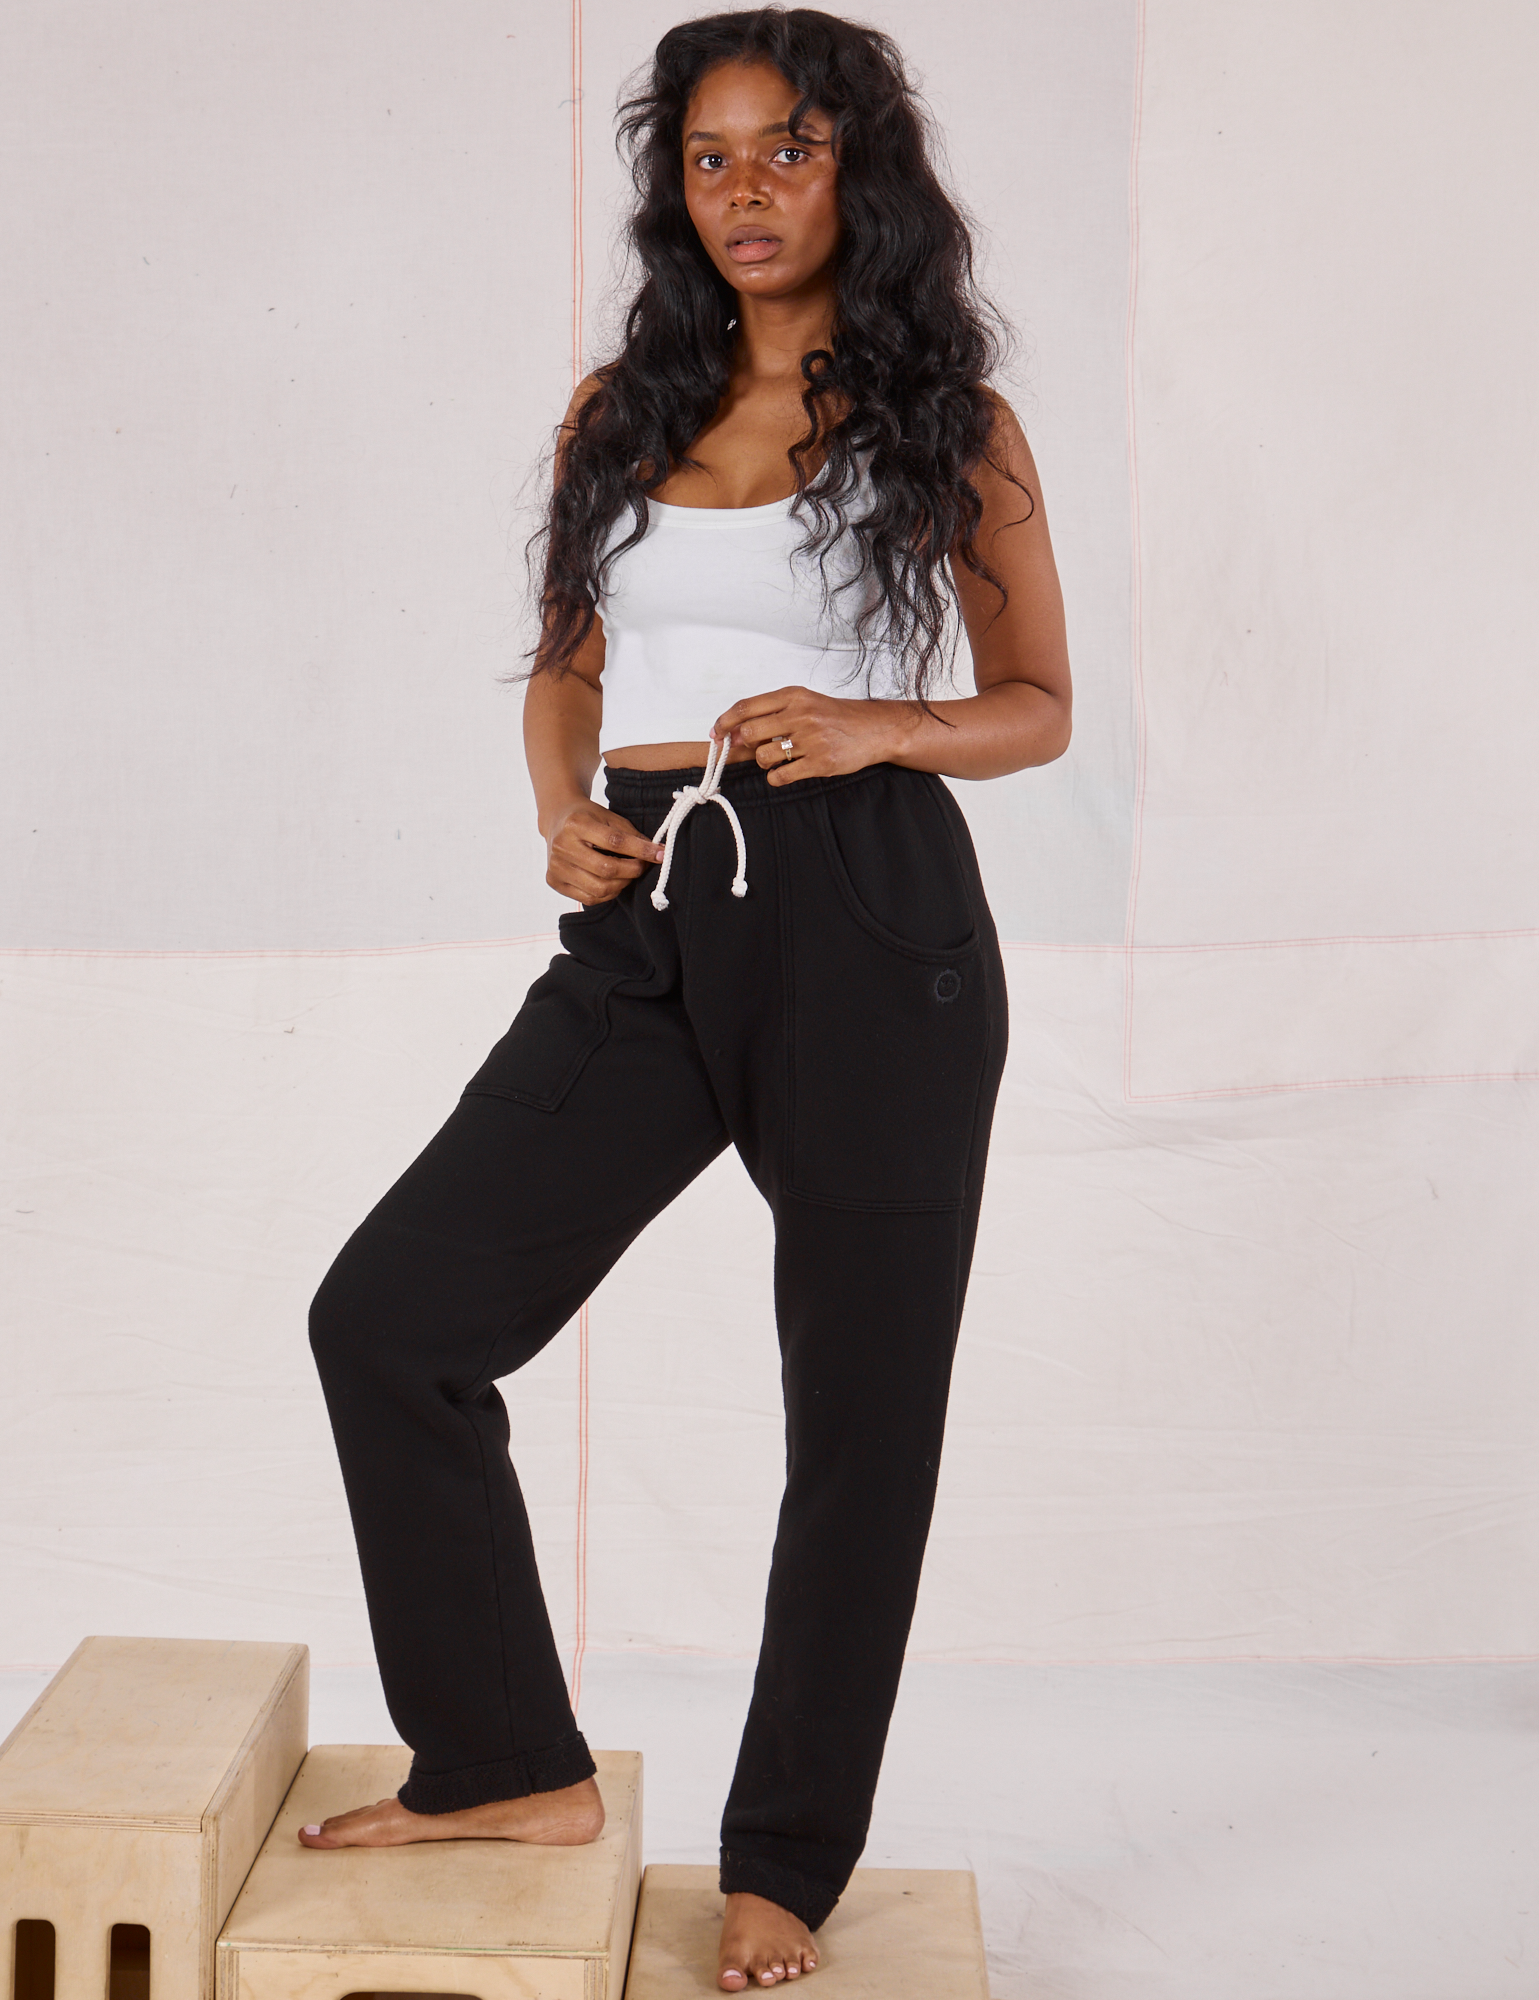 Kandia is 5&#39;3&quot; and wearing P Rolled Cuff Sweat Pants in Basic Black paired with a vintage off-white Cropped Tank